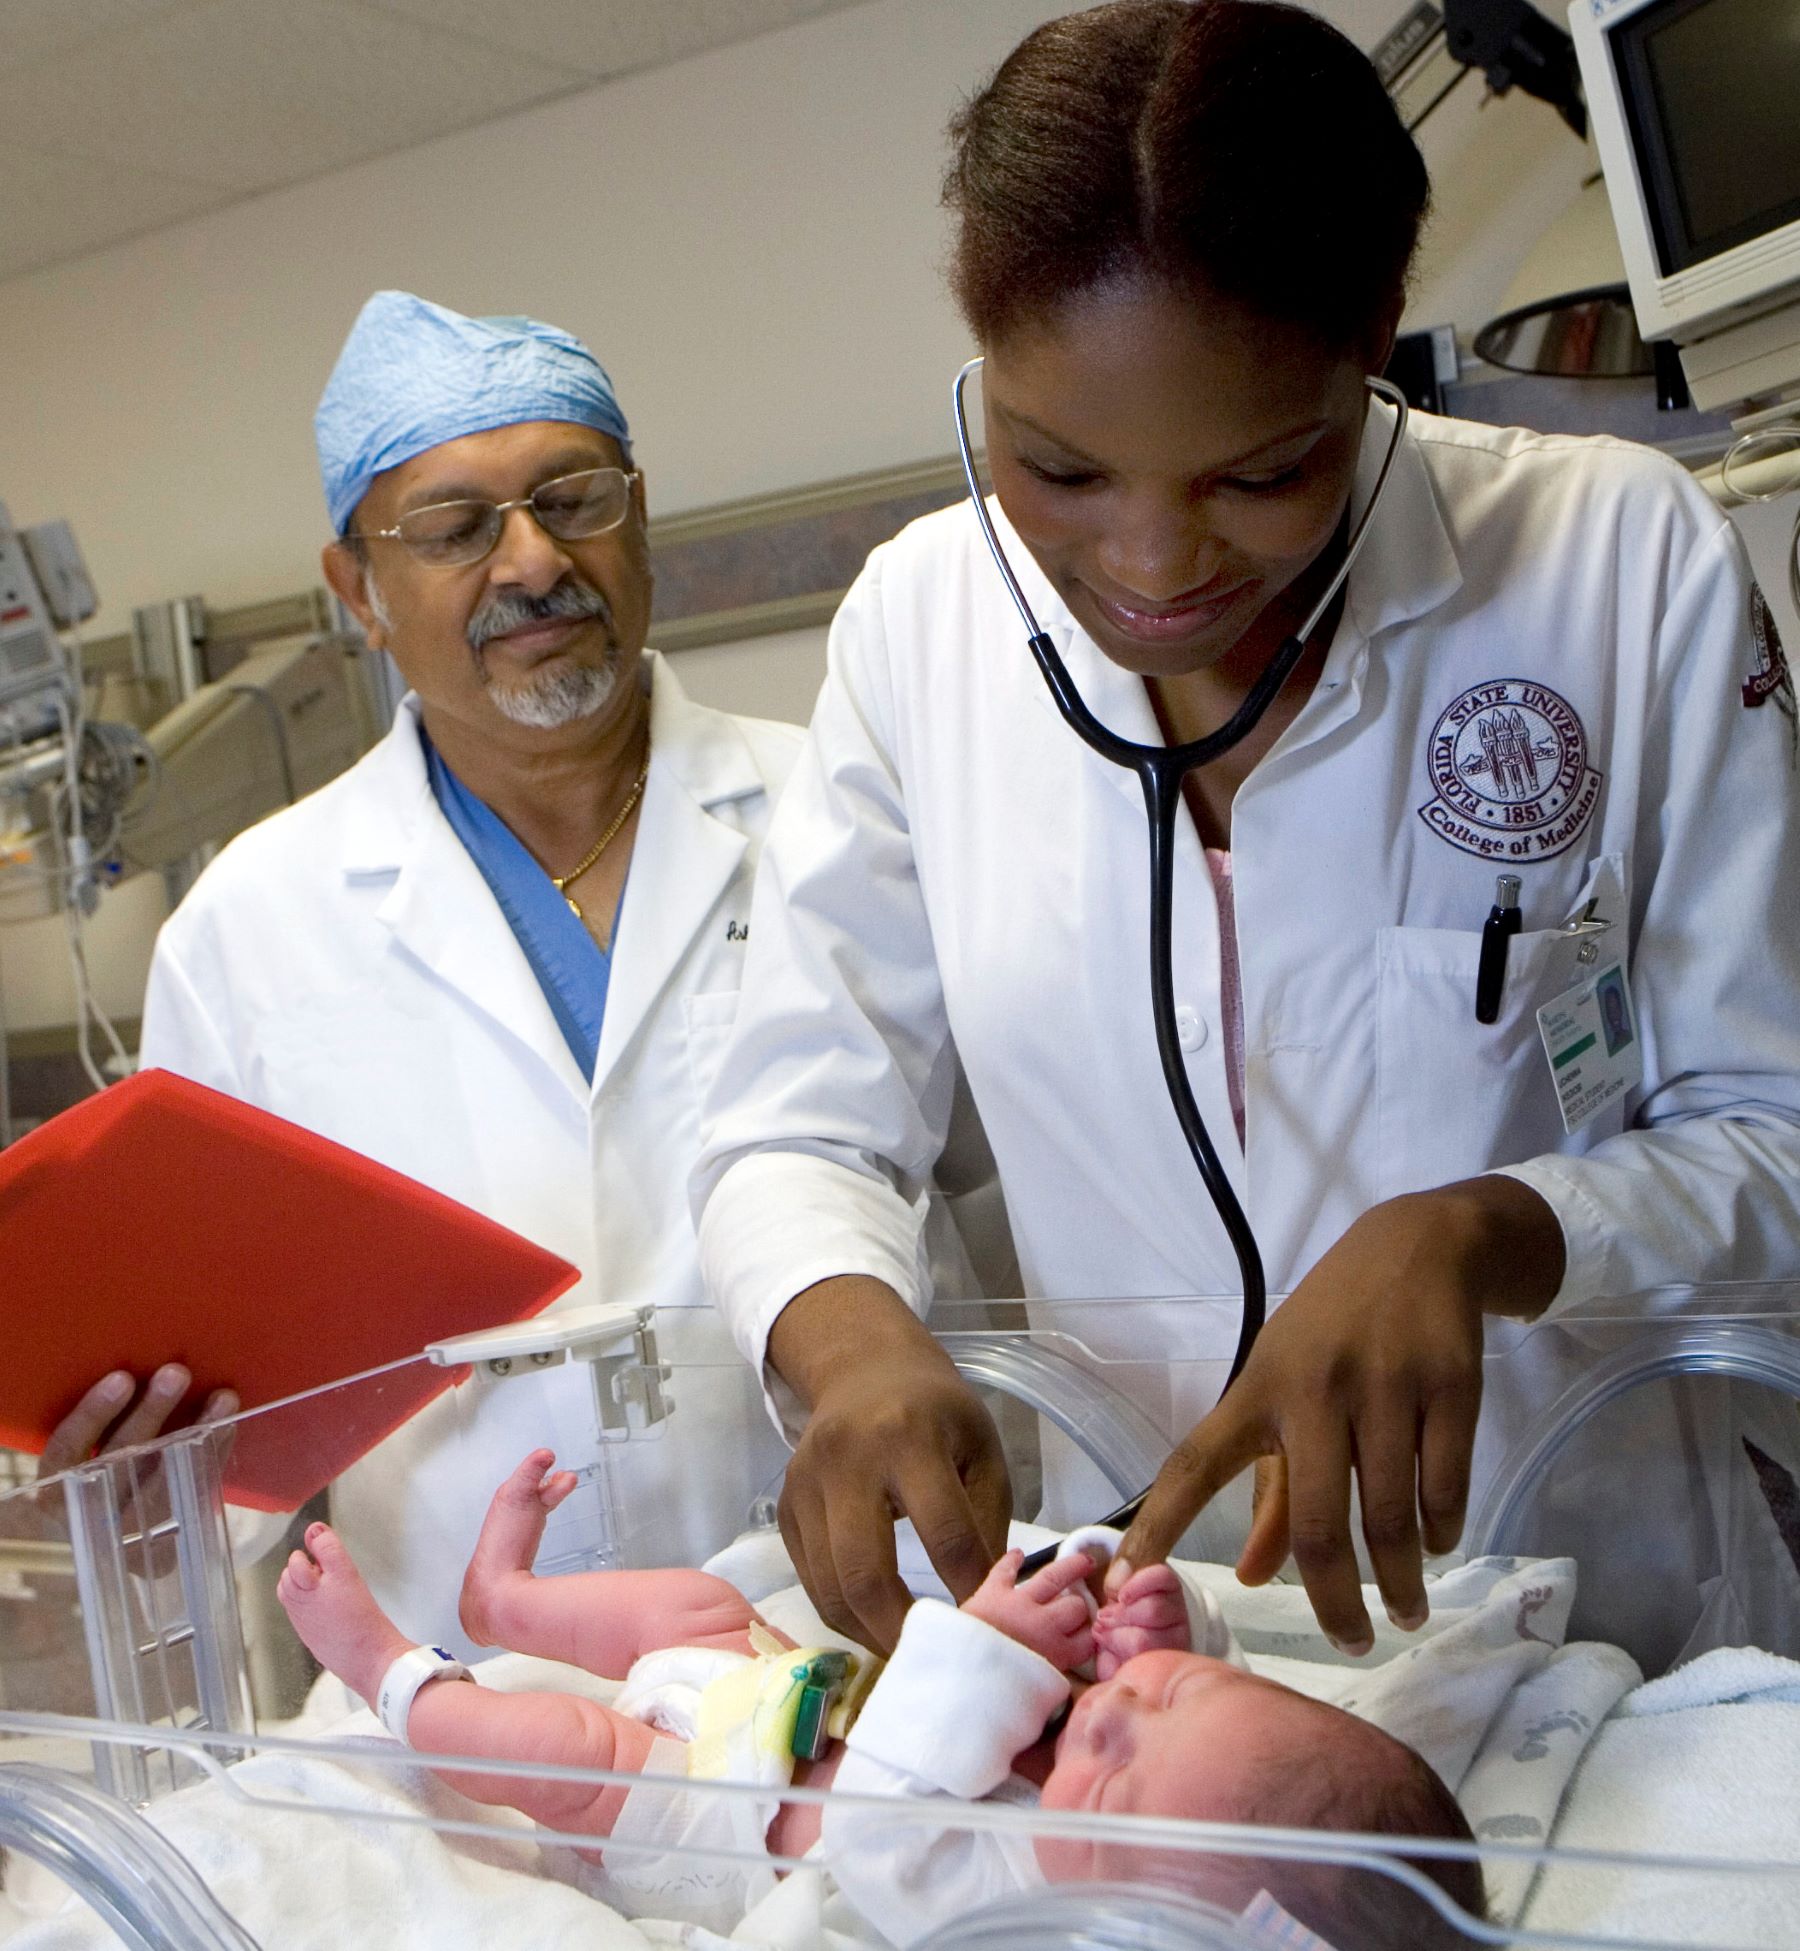 A medical student conducts a well-baby exam on an infant as the physician instructor observes.